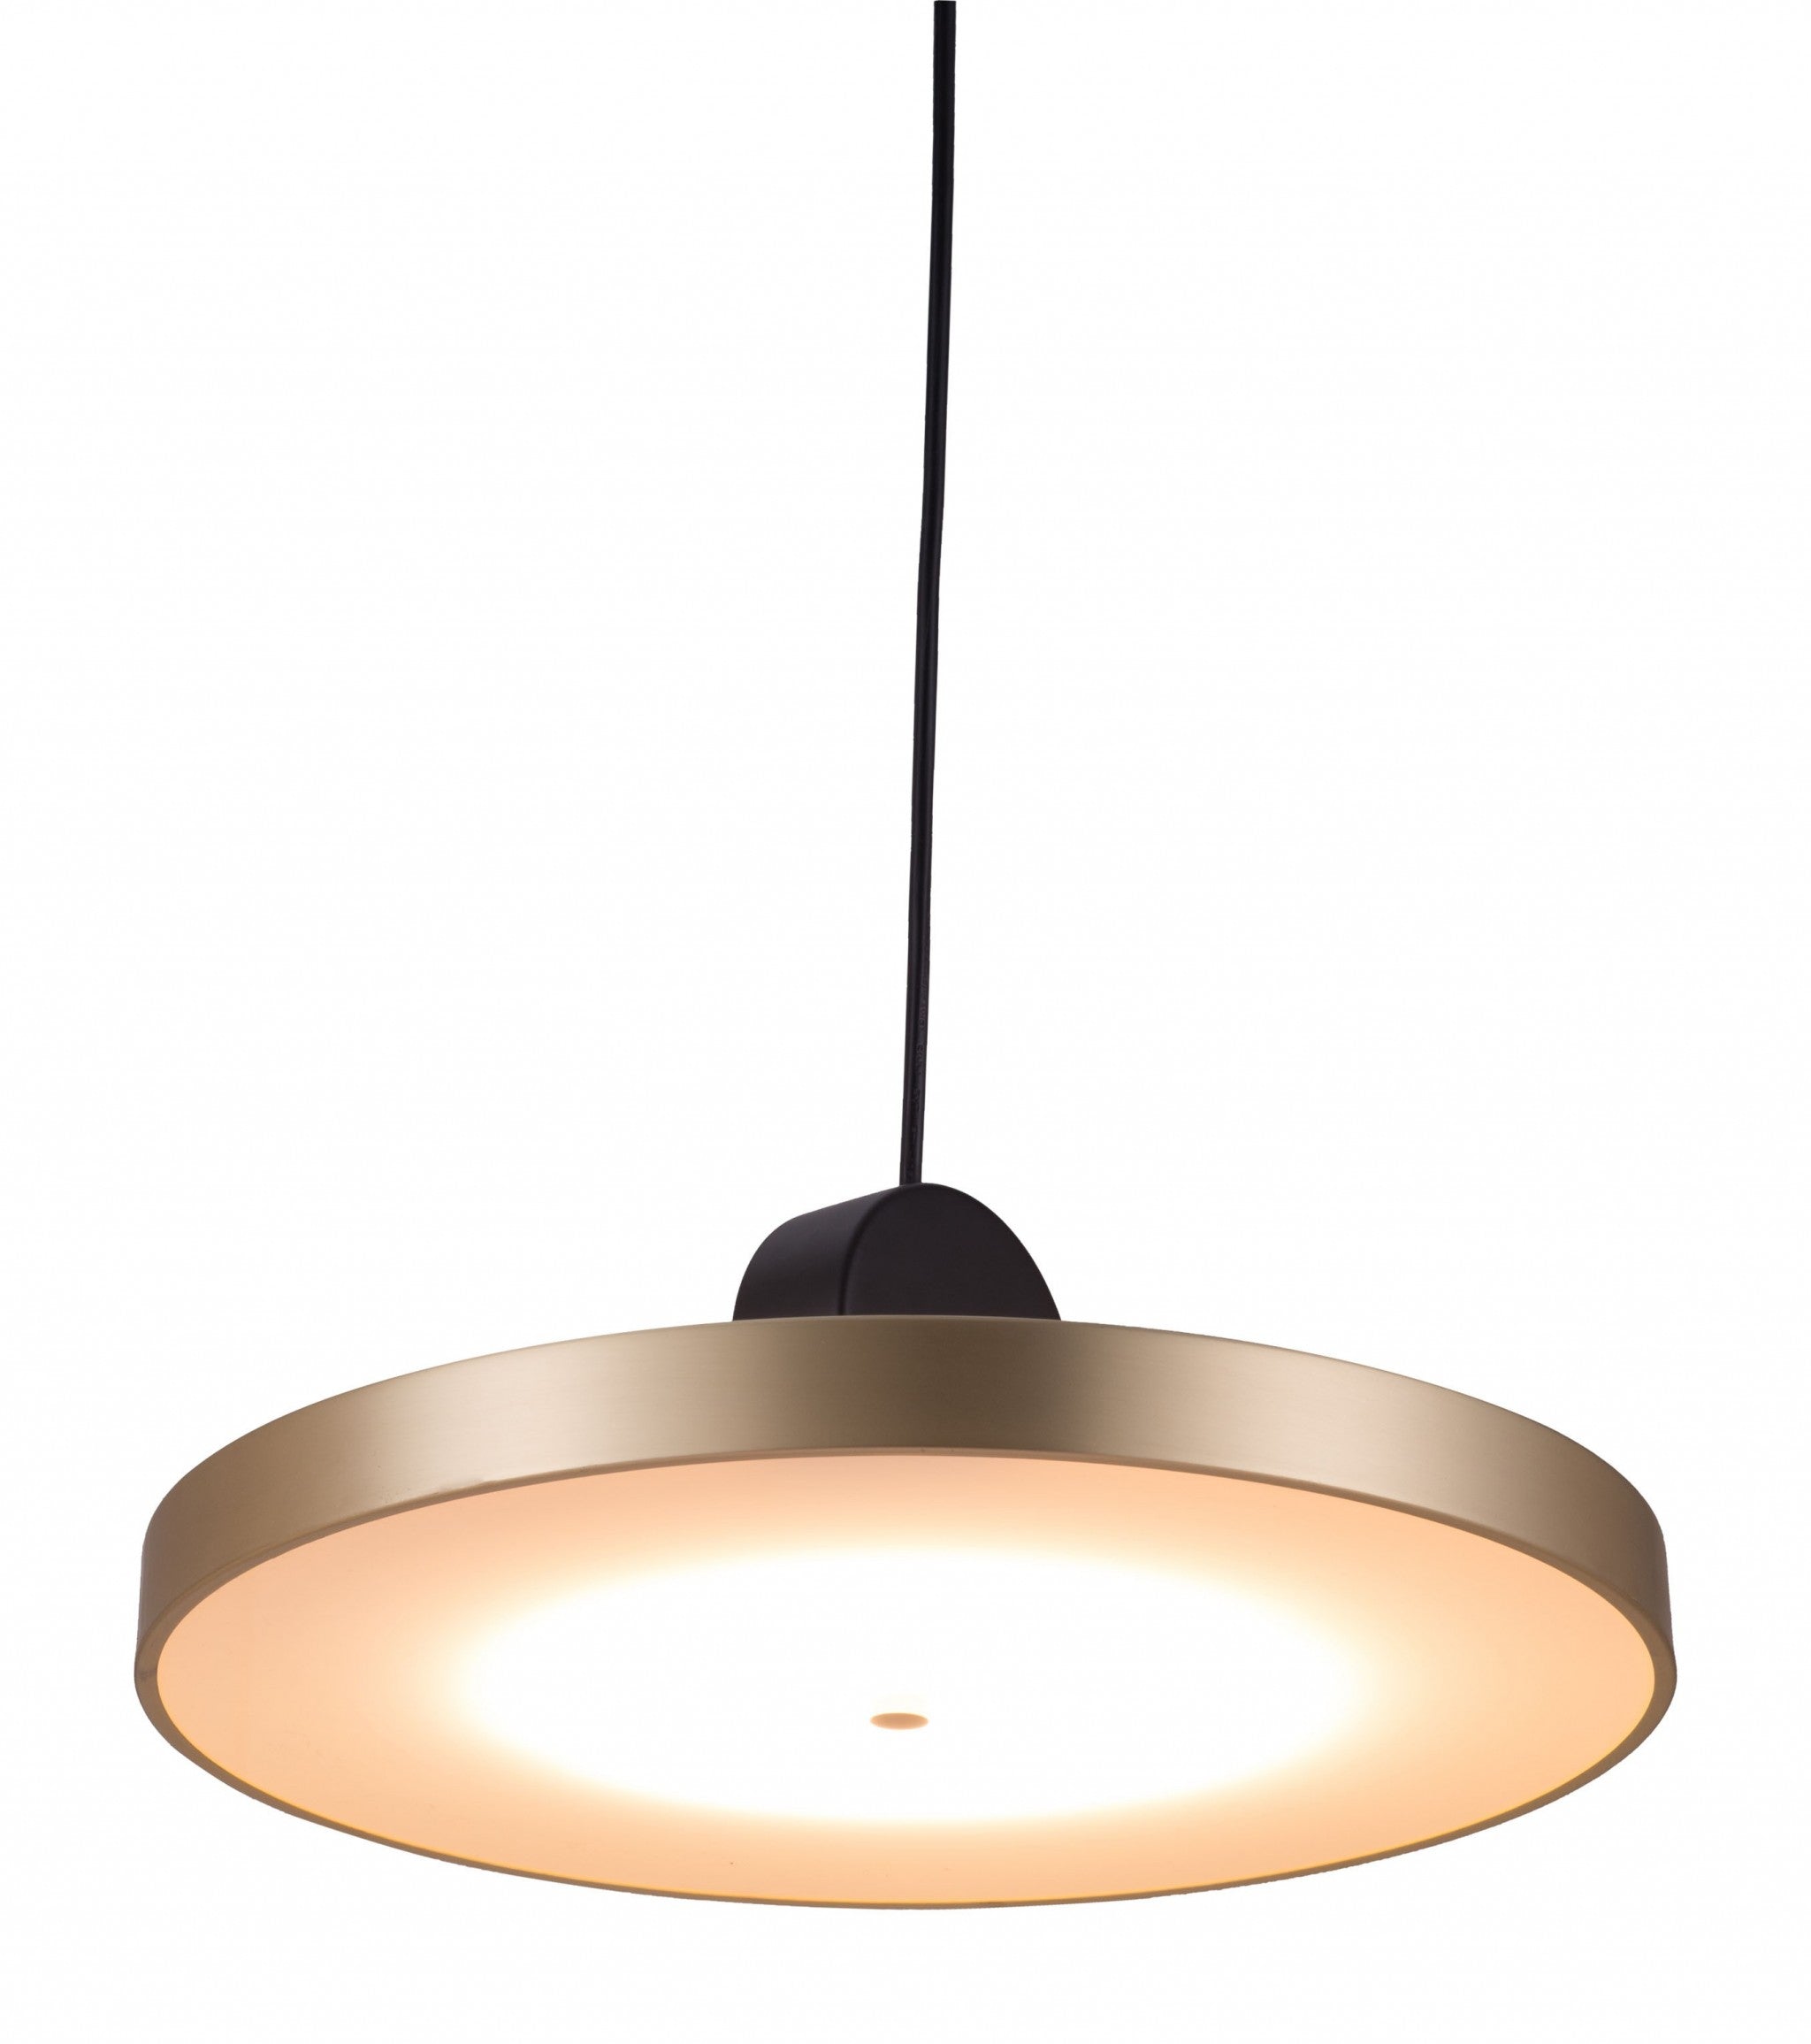 Gold Shaded Metal LED Dimmable Ceiling Light